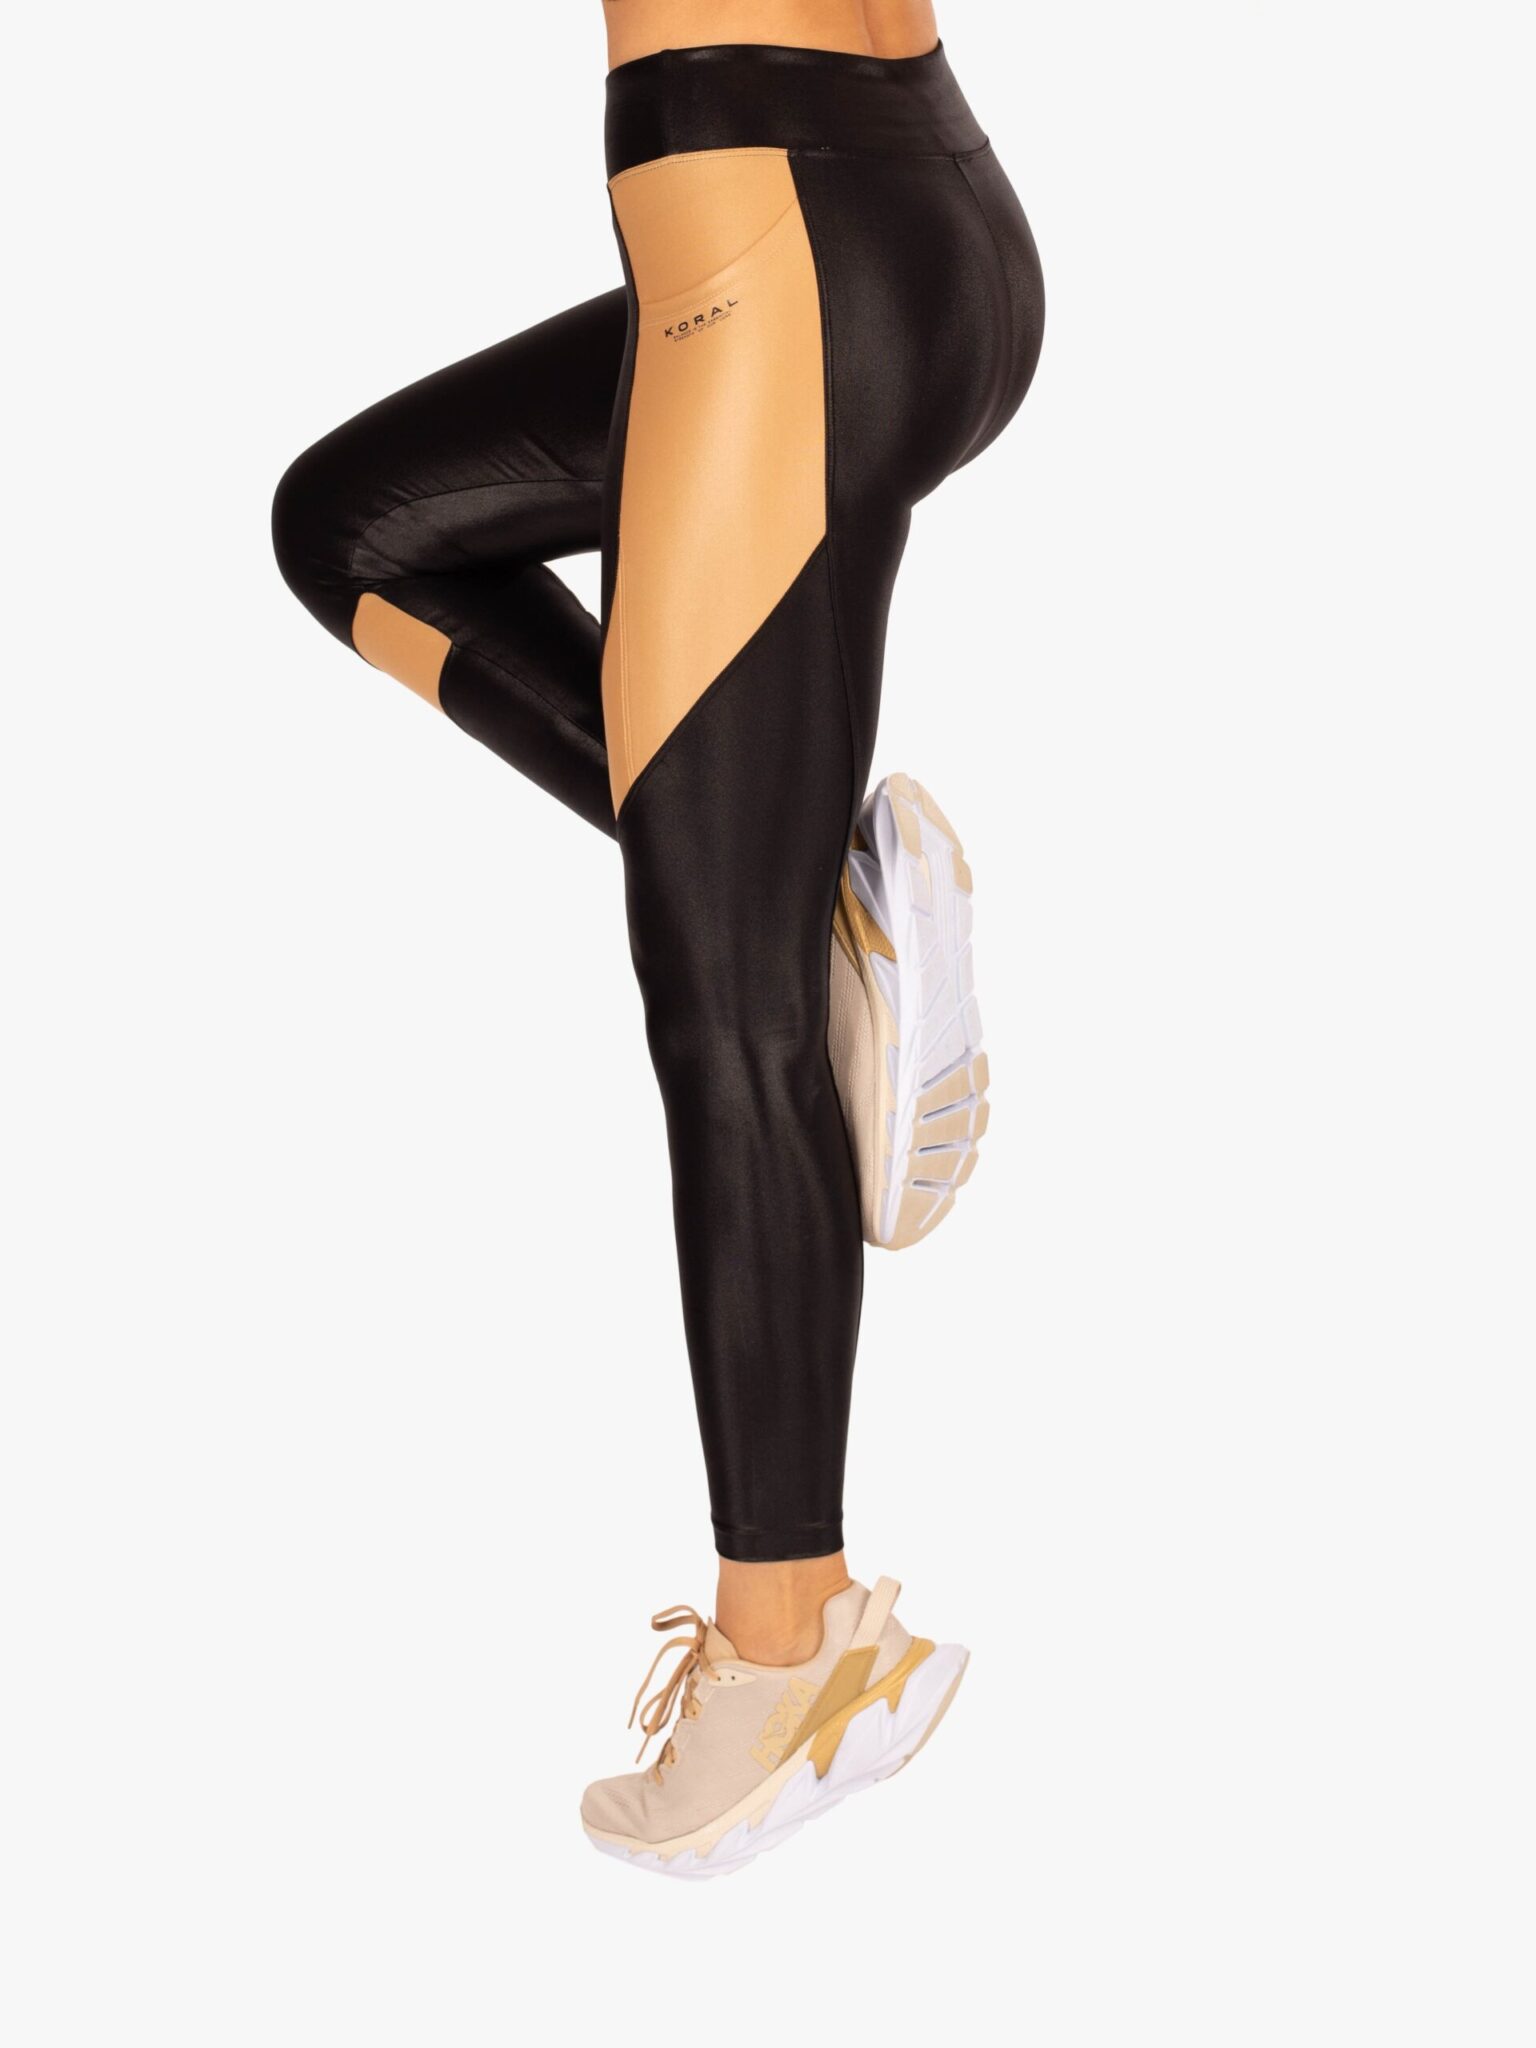 https://shes-active.com/wp-content/uploads/2021/10/Pista-Infinity-HR-Legging-Iced-Coffee-back-bottom-1-scaled-scaled.jpg